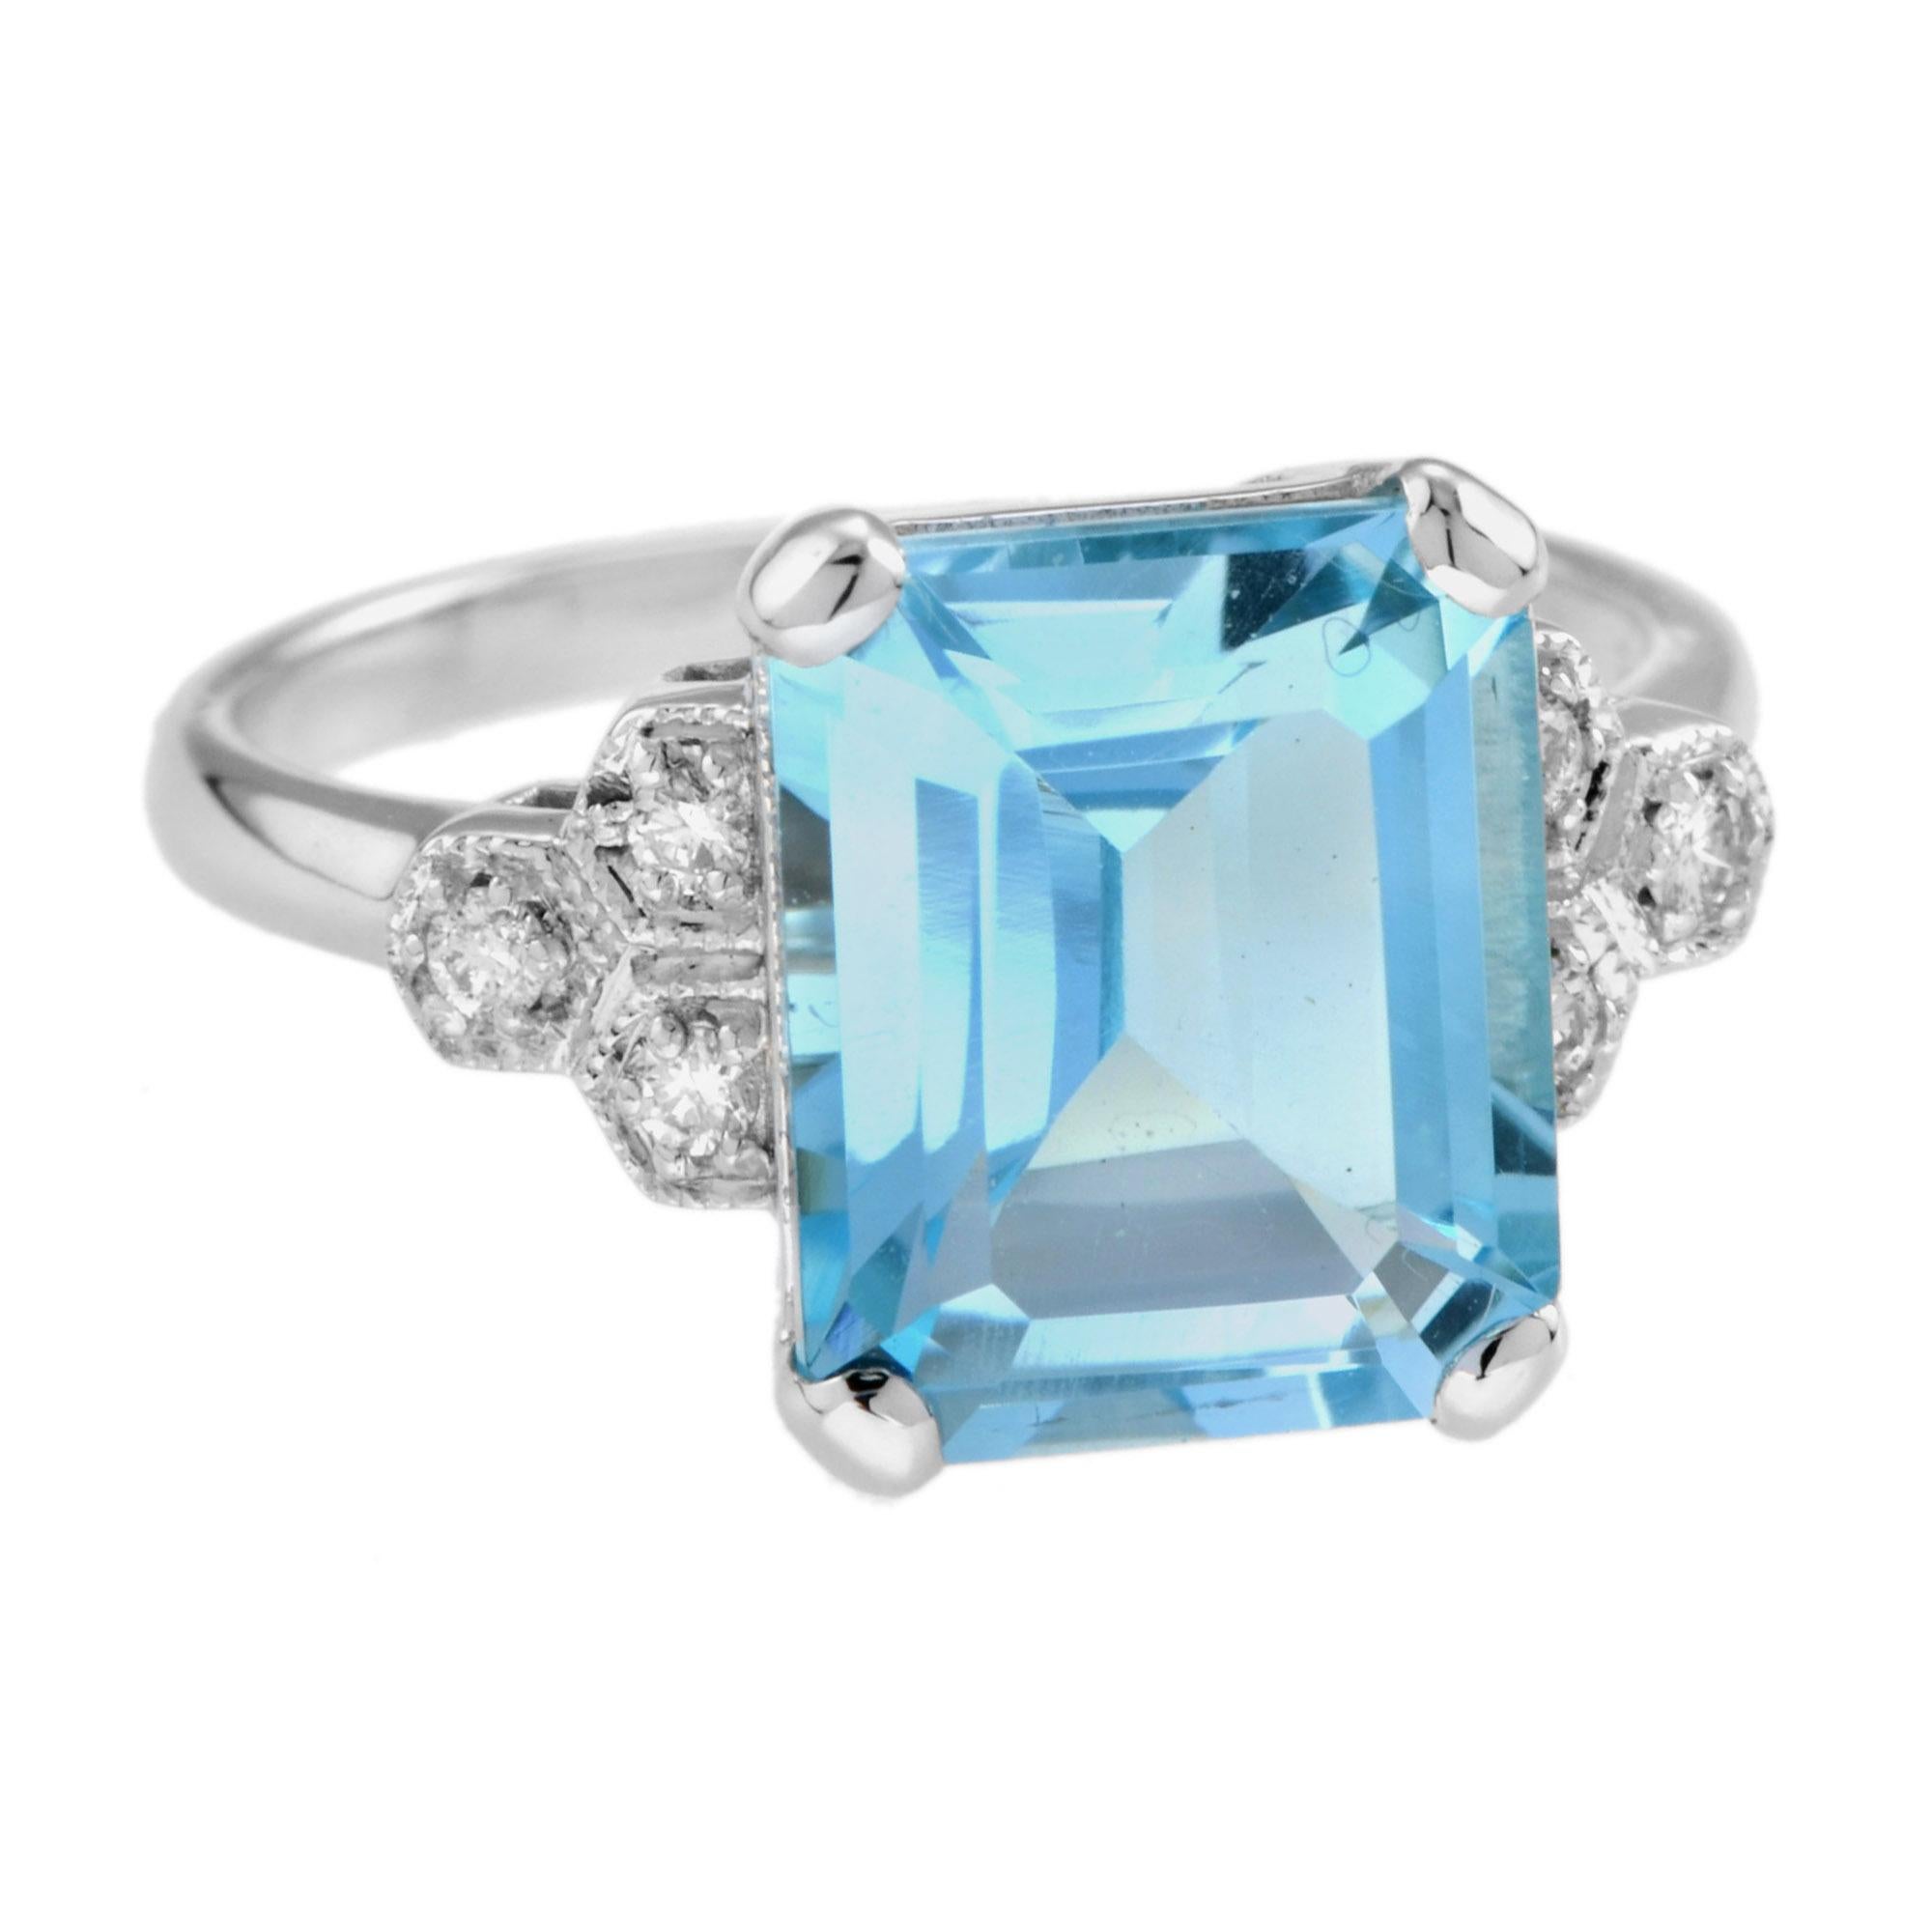 Gorgeous 9k white gold ring, beautifully decorated with an emerald cut blue topaz. The center peice is adorned with round cut diamonds on either side. A timeless piece of jewelry that is suitable for not only a special gift, but also as an